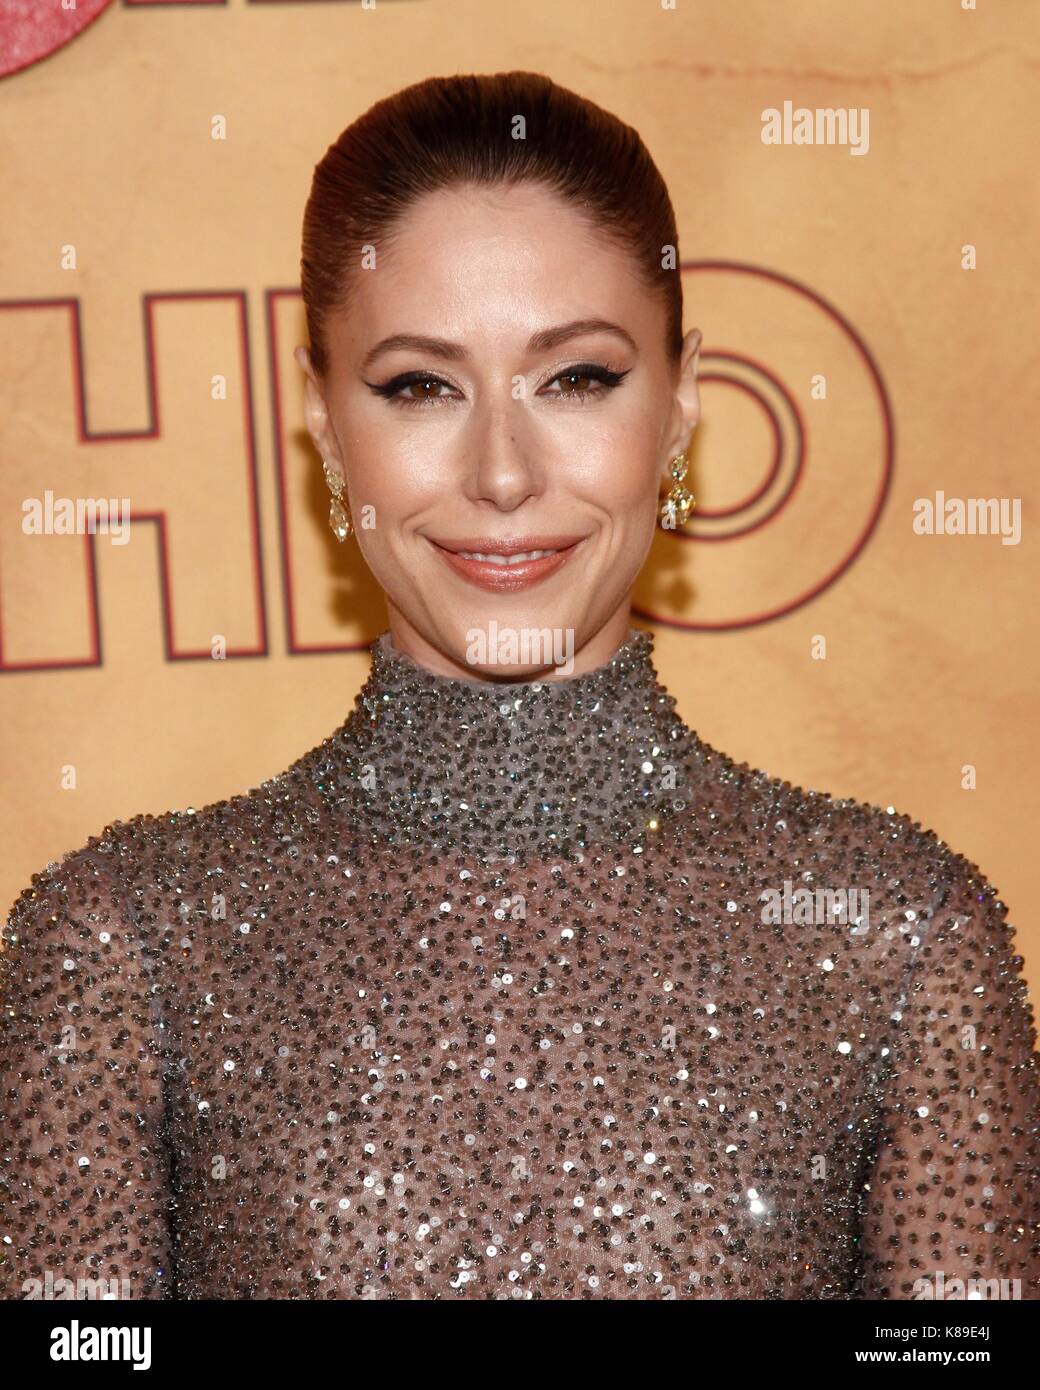 Los Angeles, CA, USA. 17th Sep, 2017. Amanda Crew at arrivals for HBO Emmy After Party - Part 2, The Pacific Design Center, Los Angeles, CA September 17, 2017. Credit: JA/Everett Collection/Alamy Live News Stock Photo